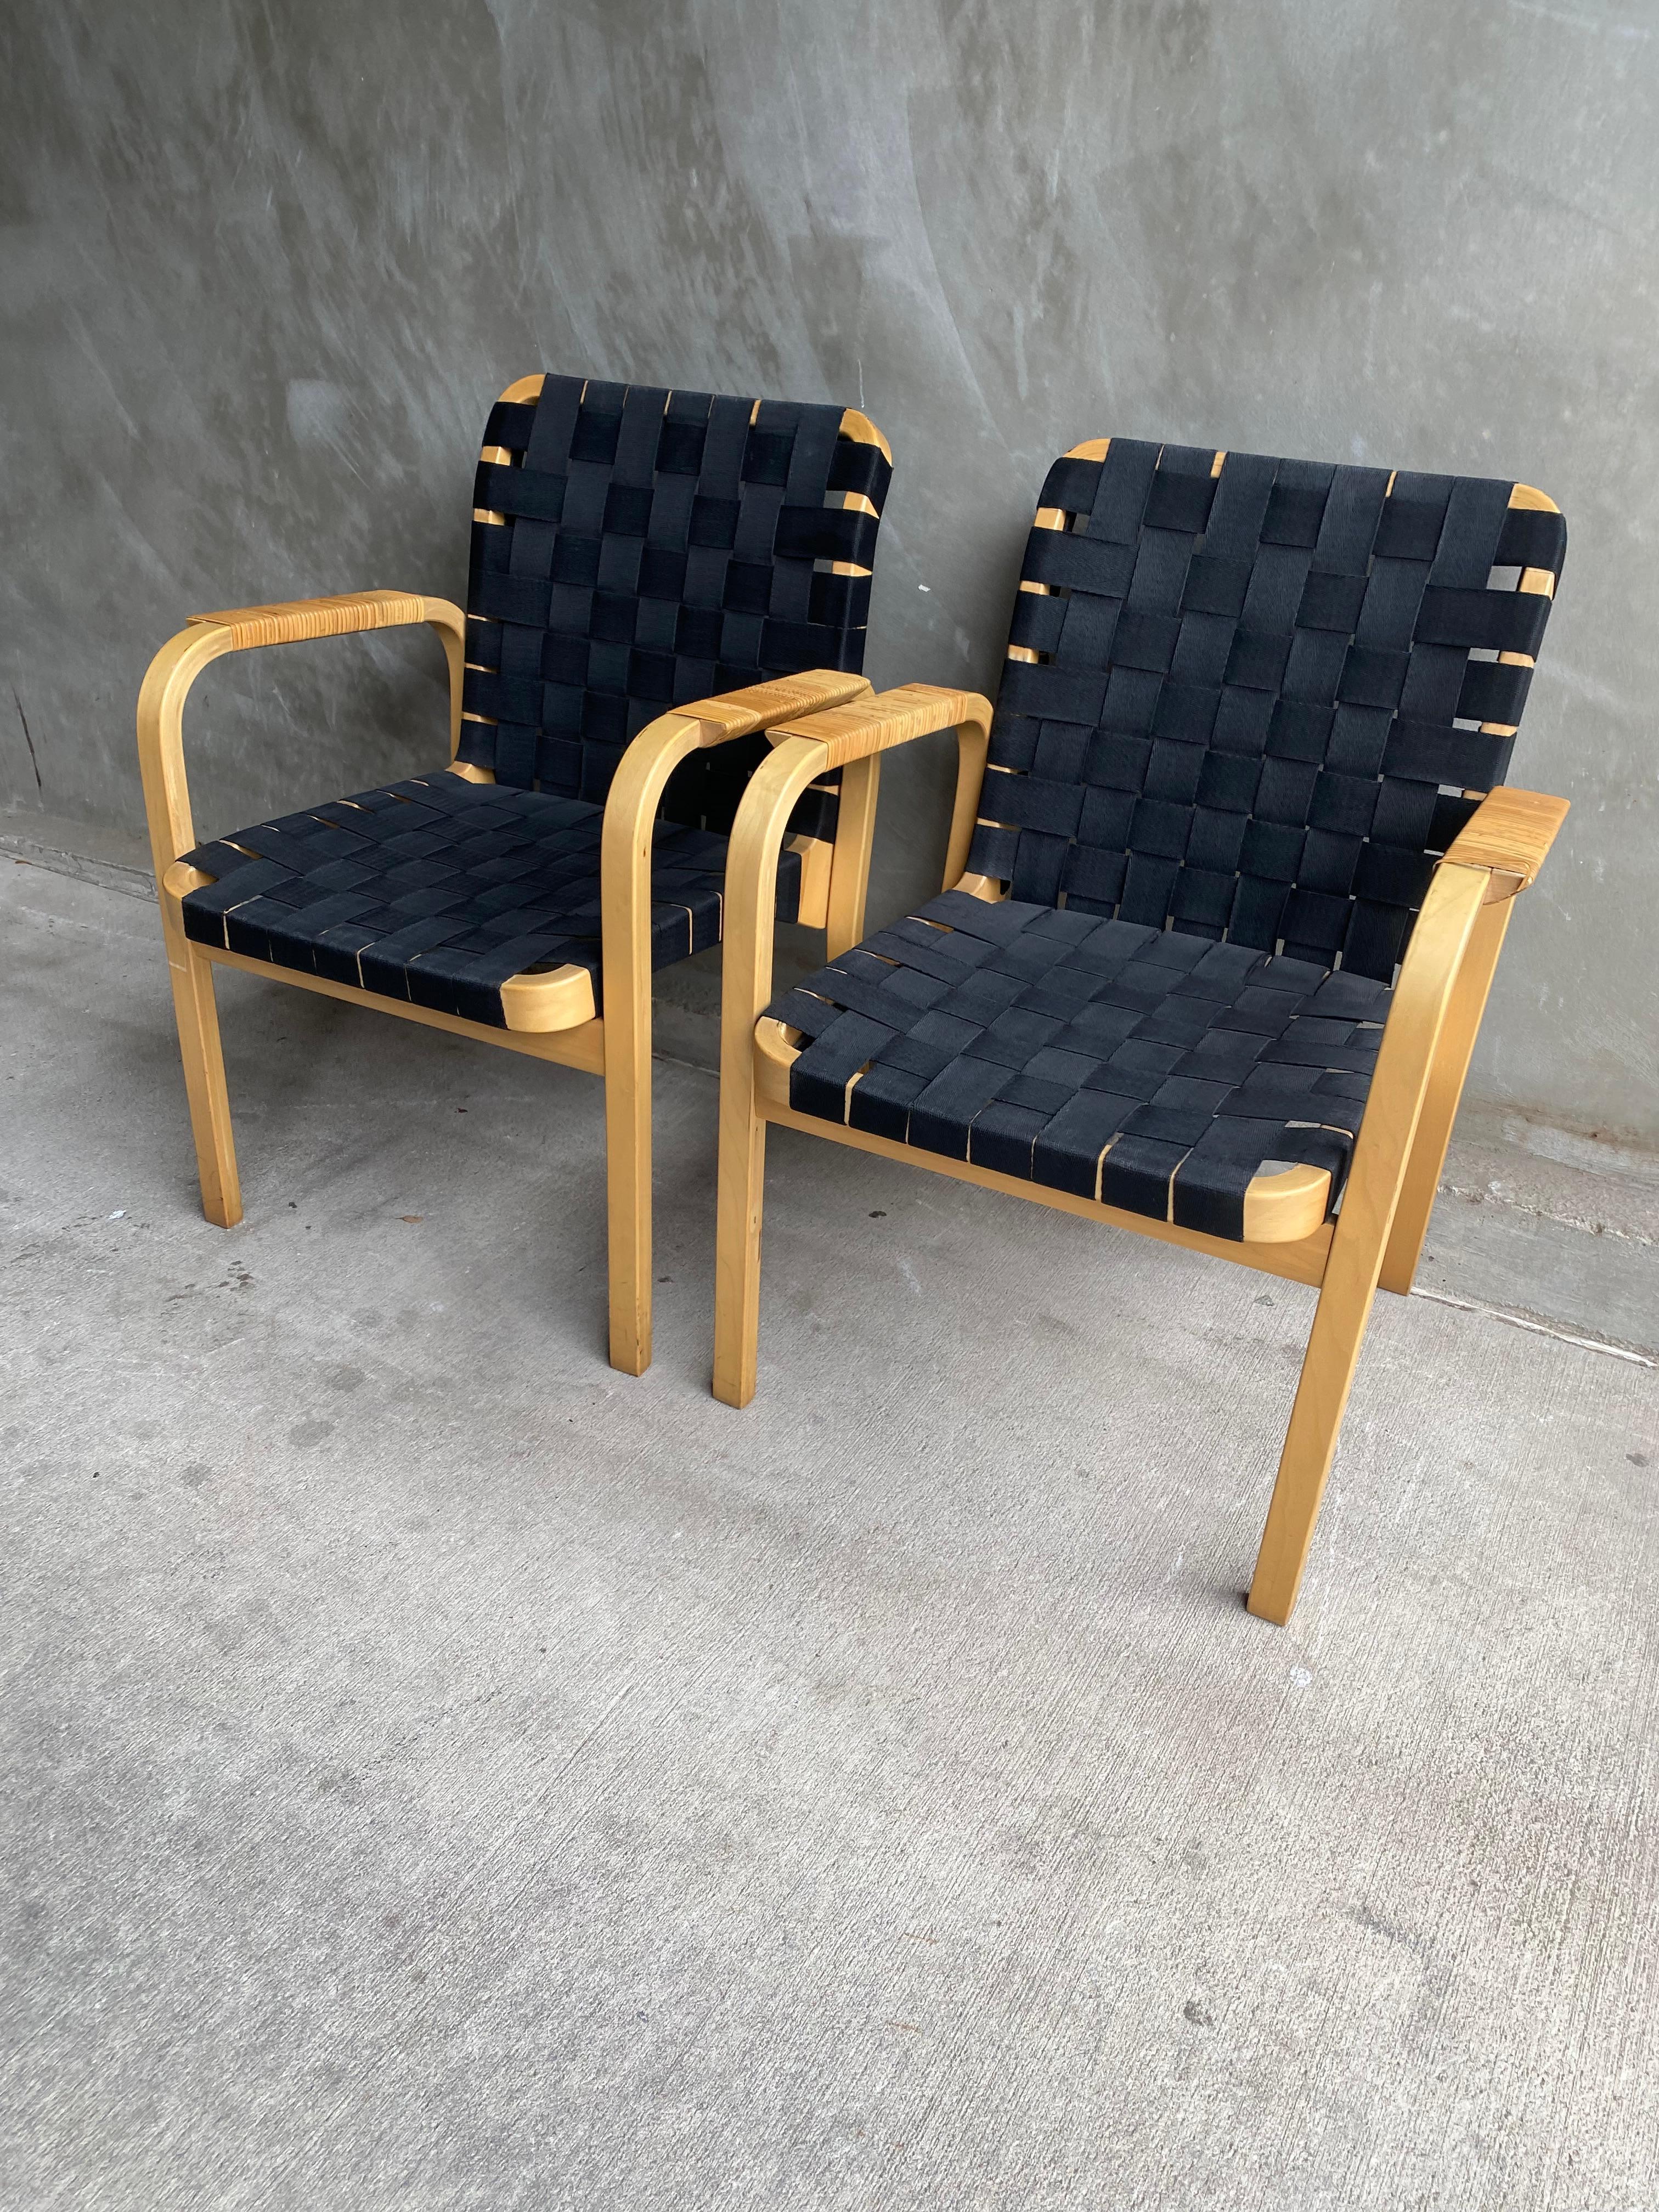 Set of 4 Alvar Aalto Chairs with Black Straps, Finland, 1960's For Sale 5